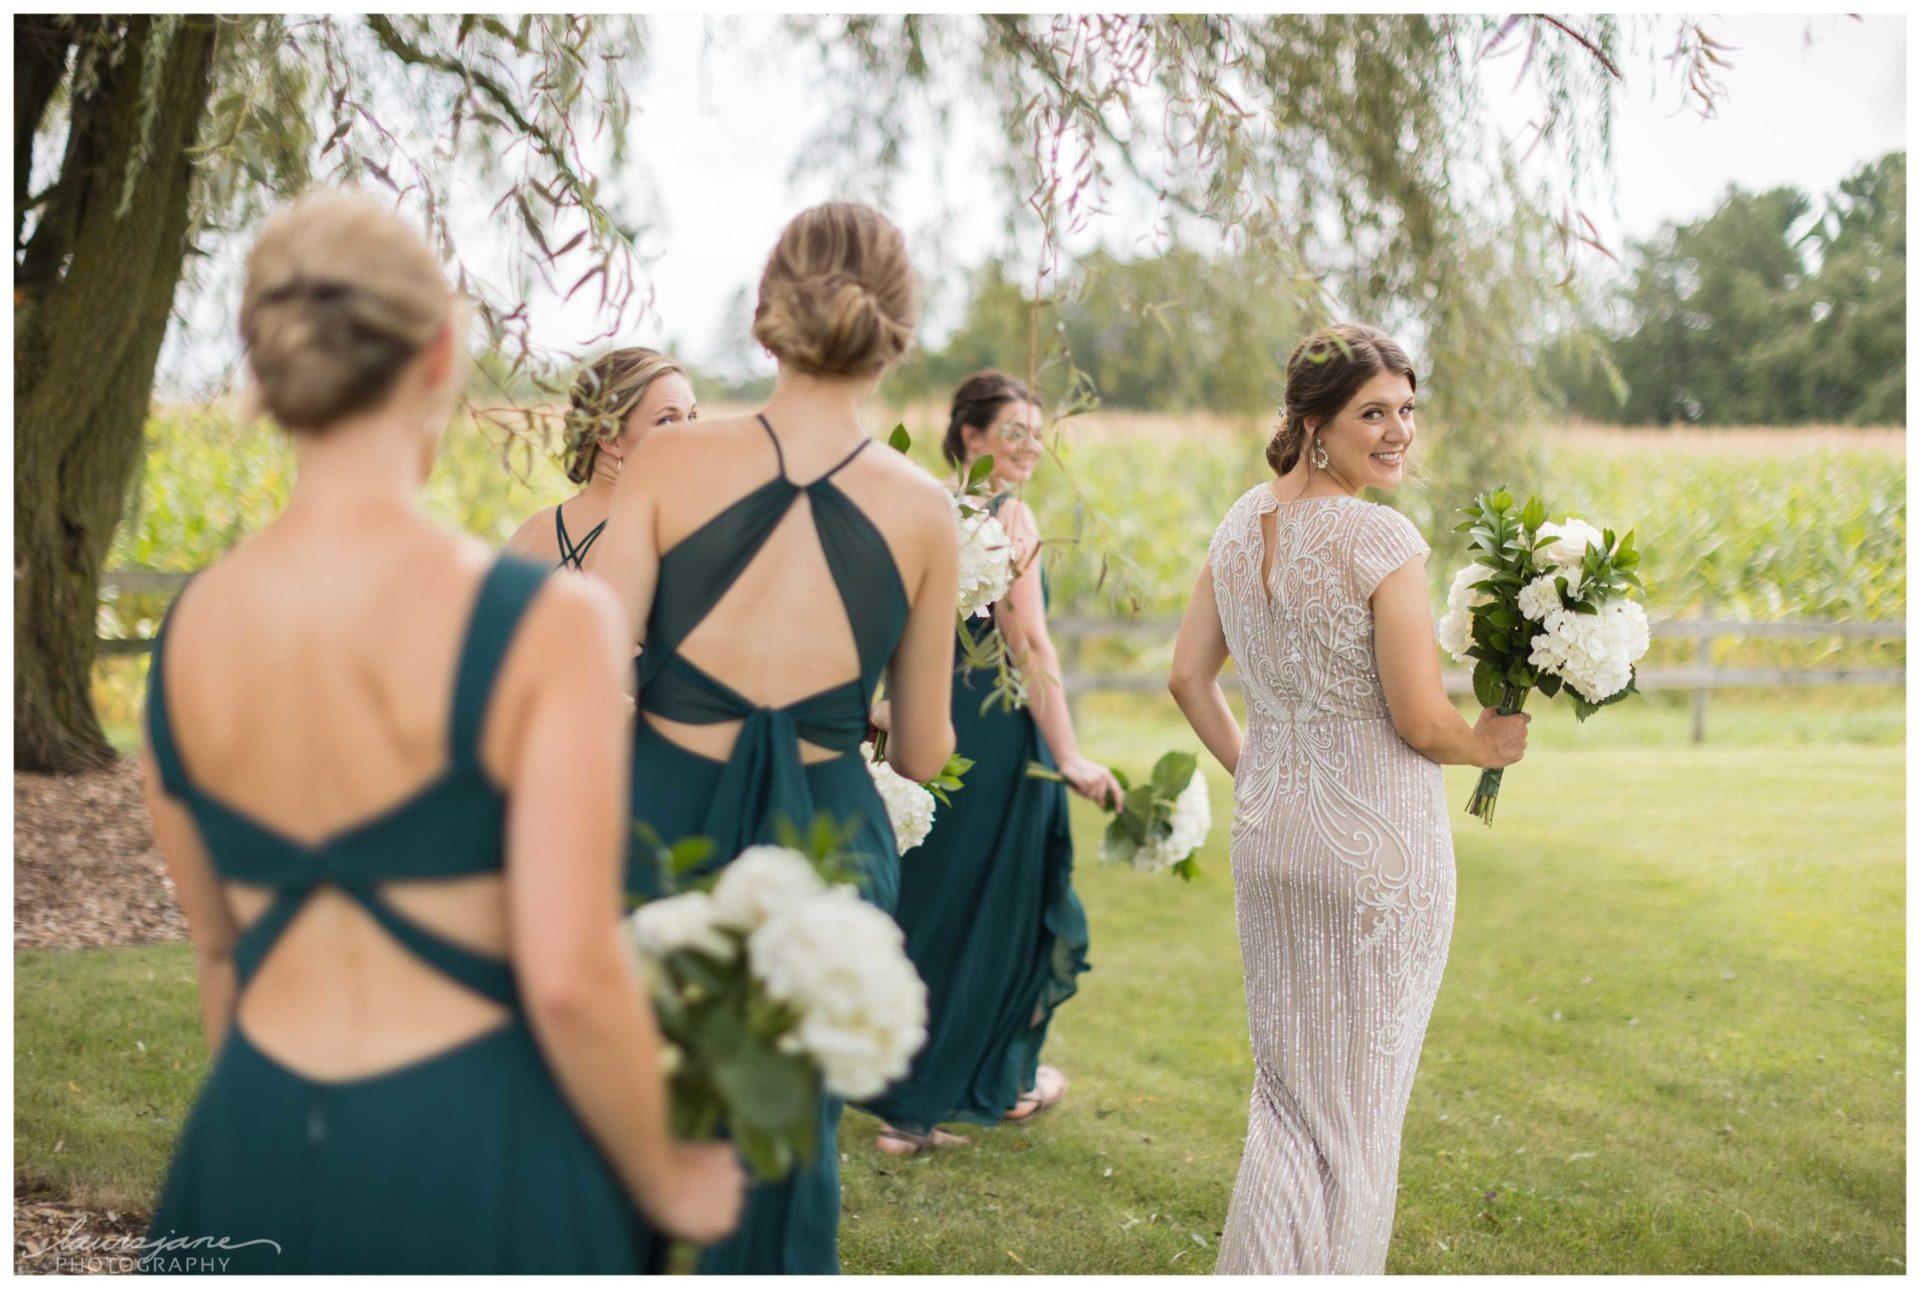 Bridal Portraits with Willow Trees